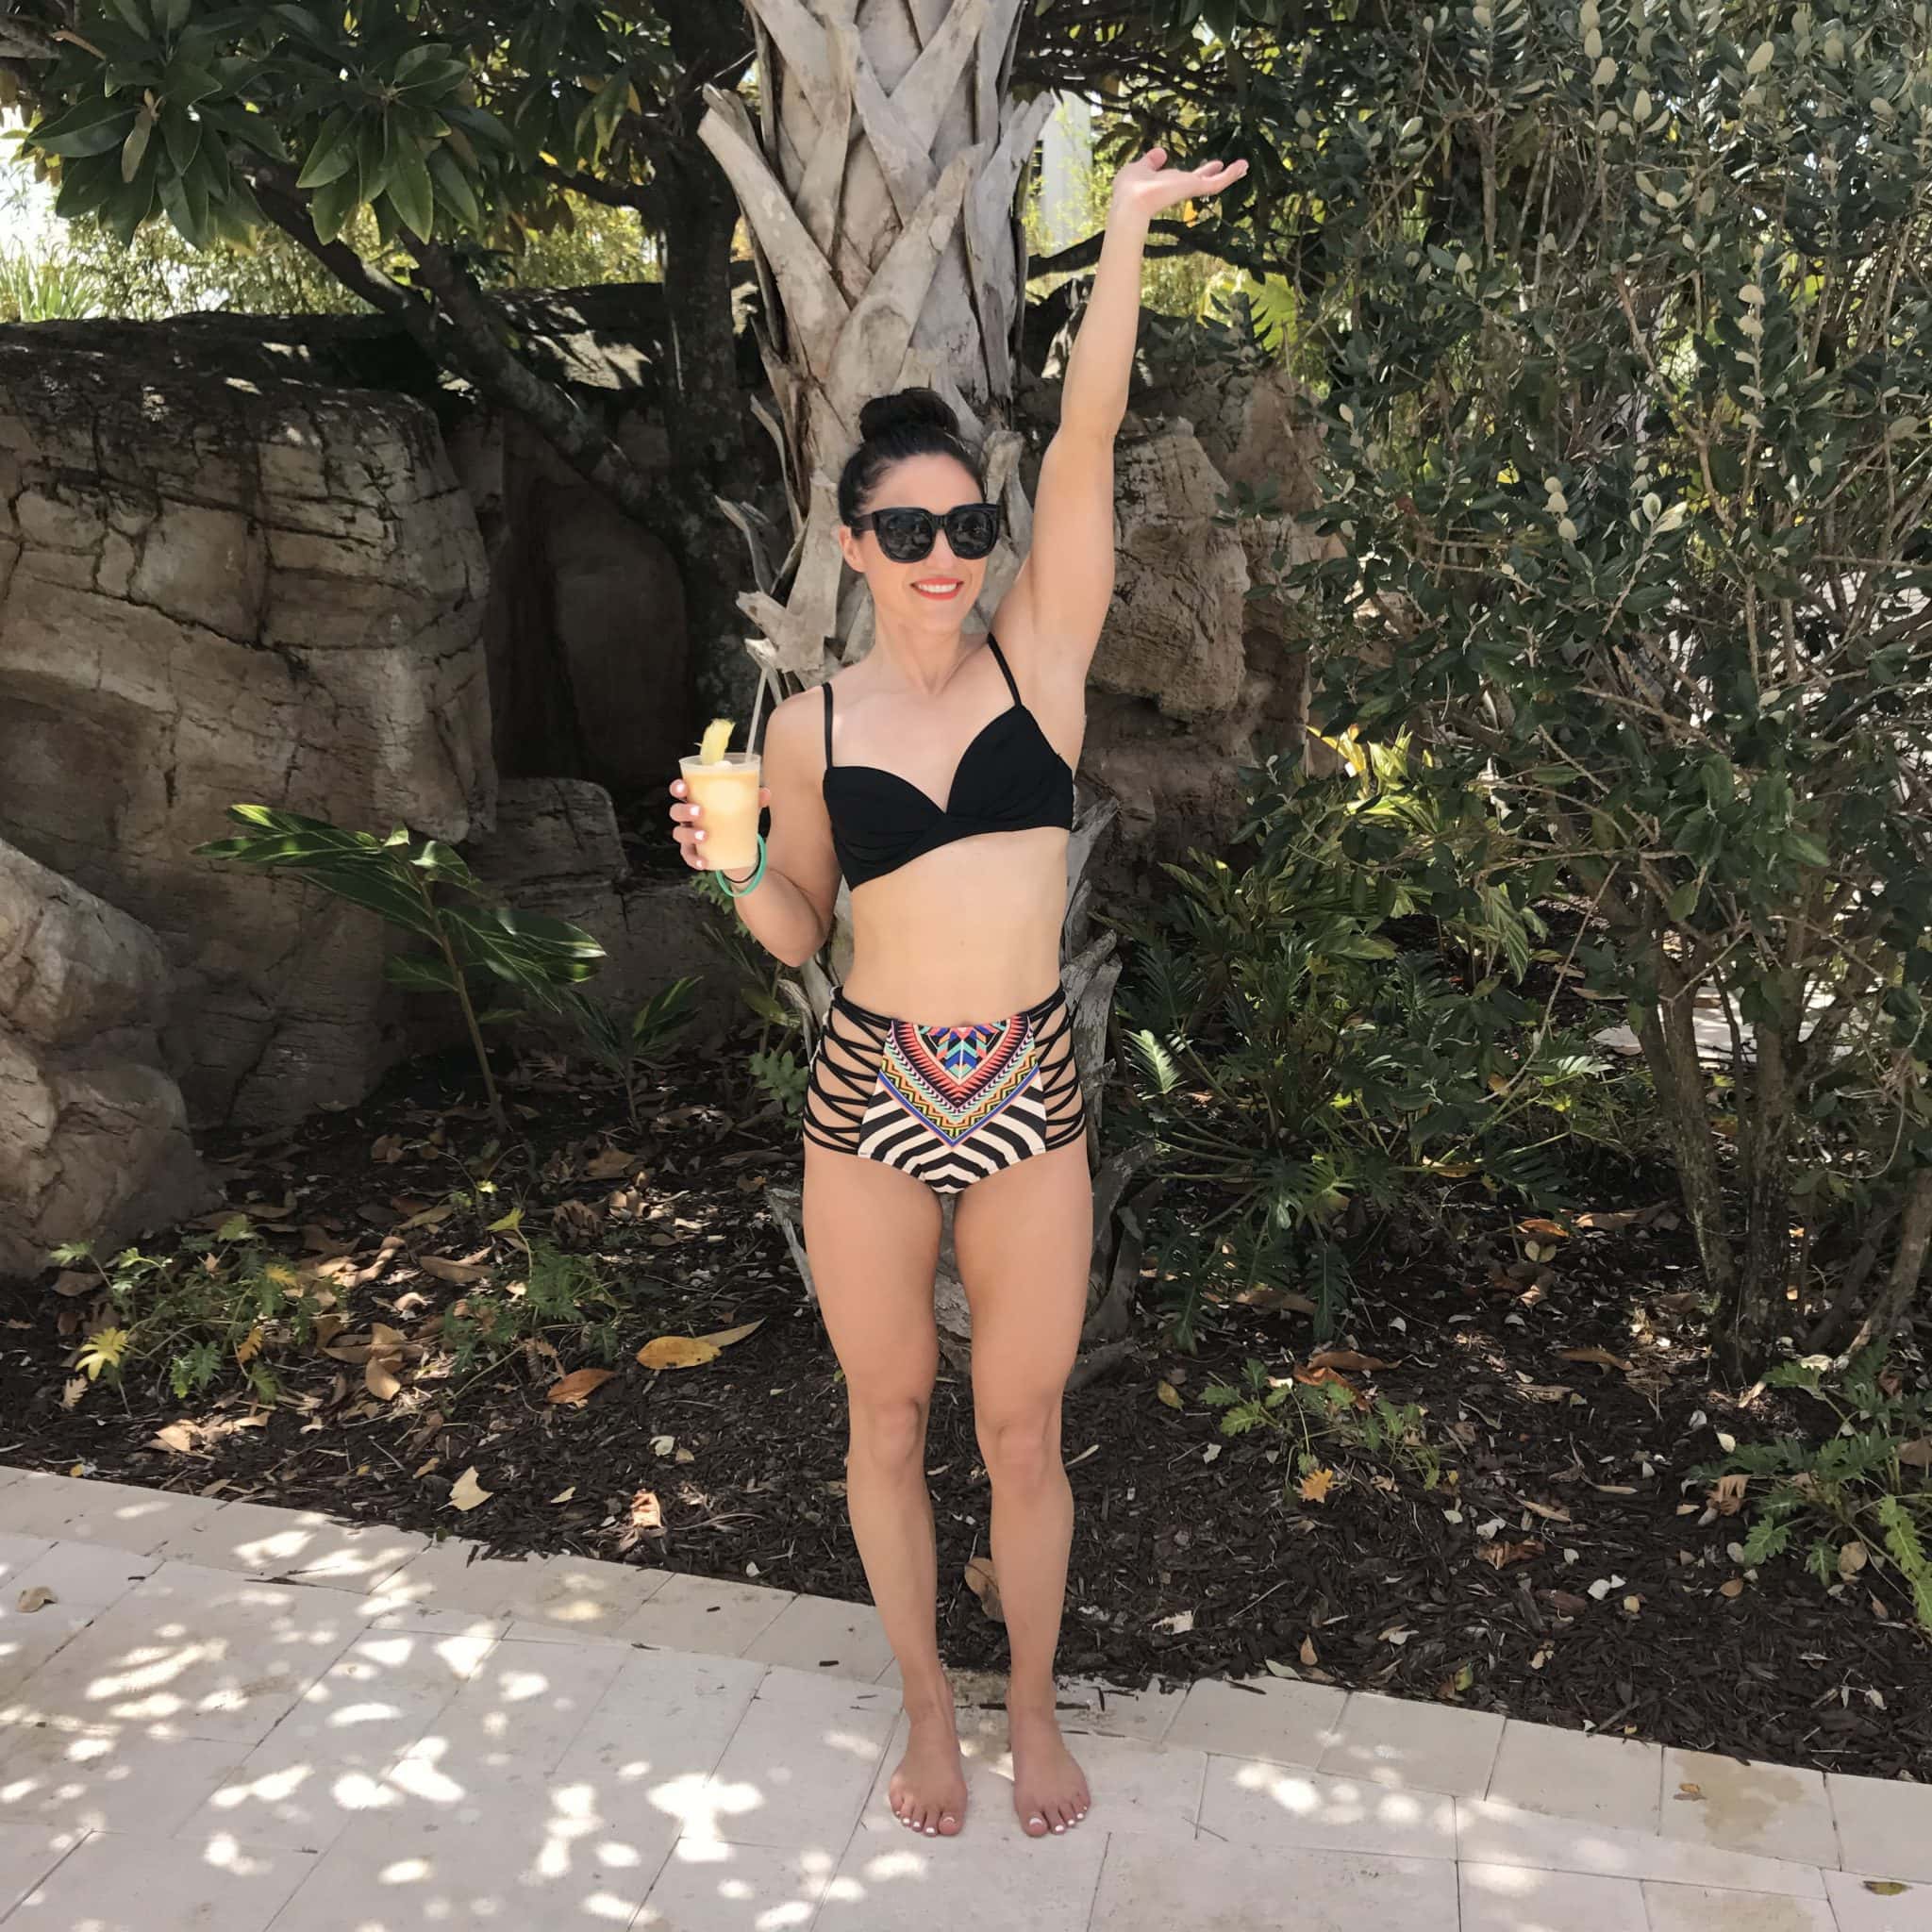 high waist bikini - Our Stay at Orlando World Center Marriott by popular New Jersey travel blogger Fit Mommy in Heels